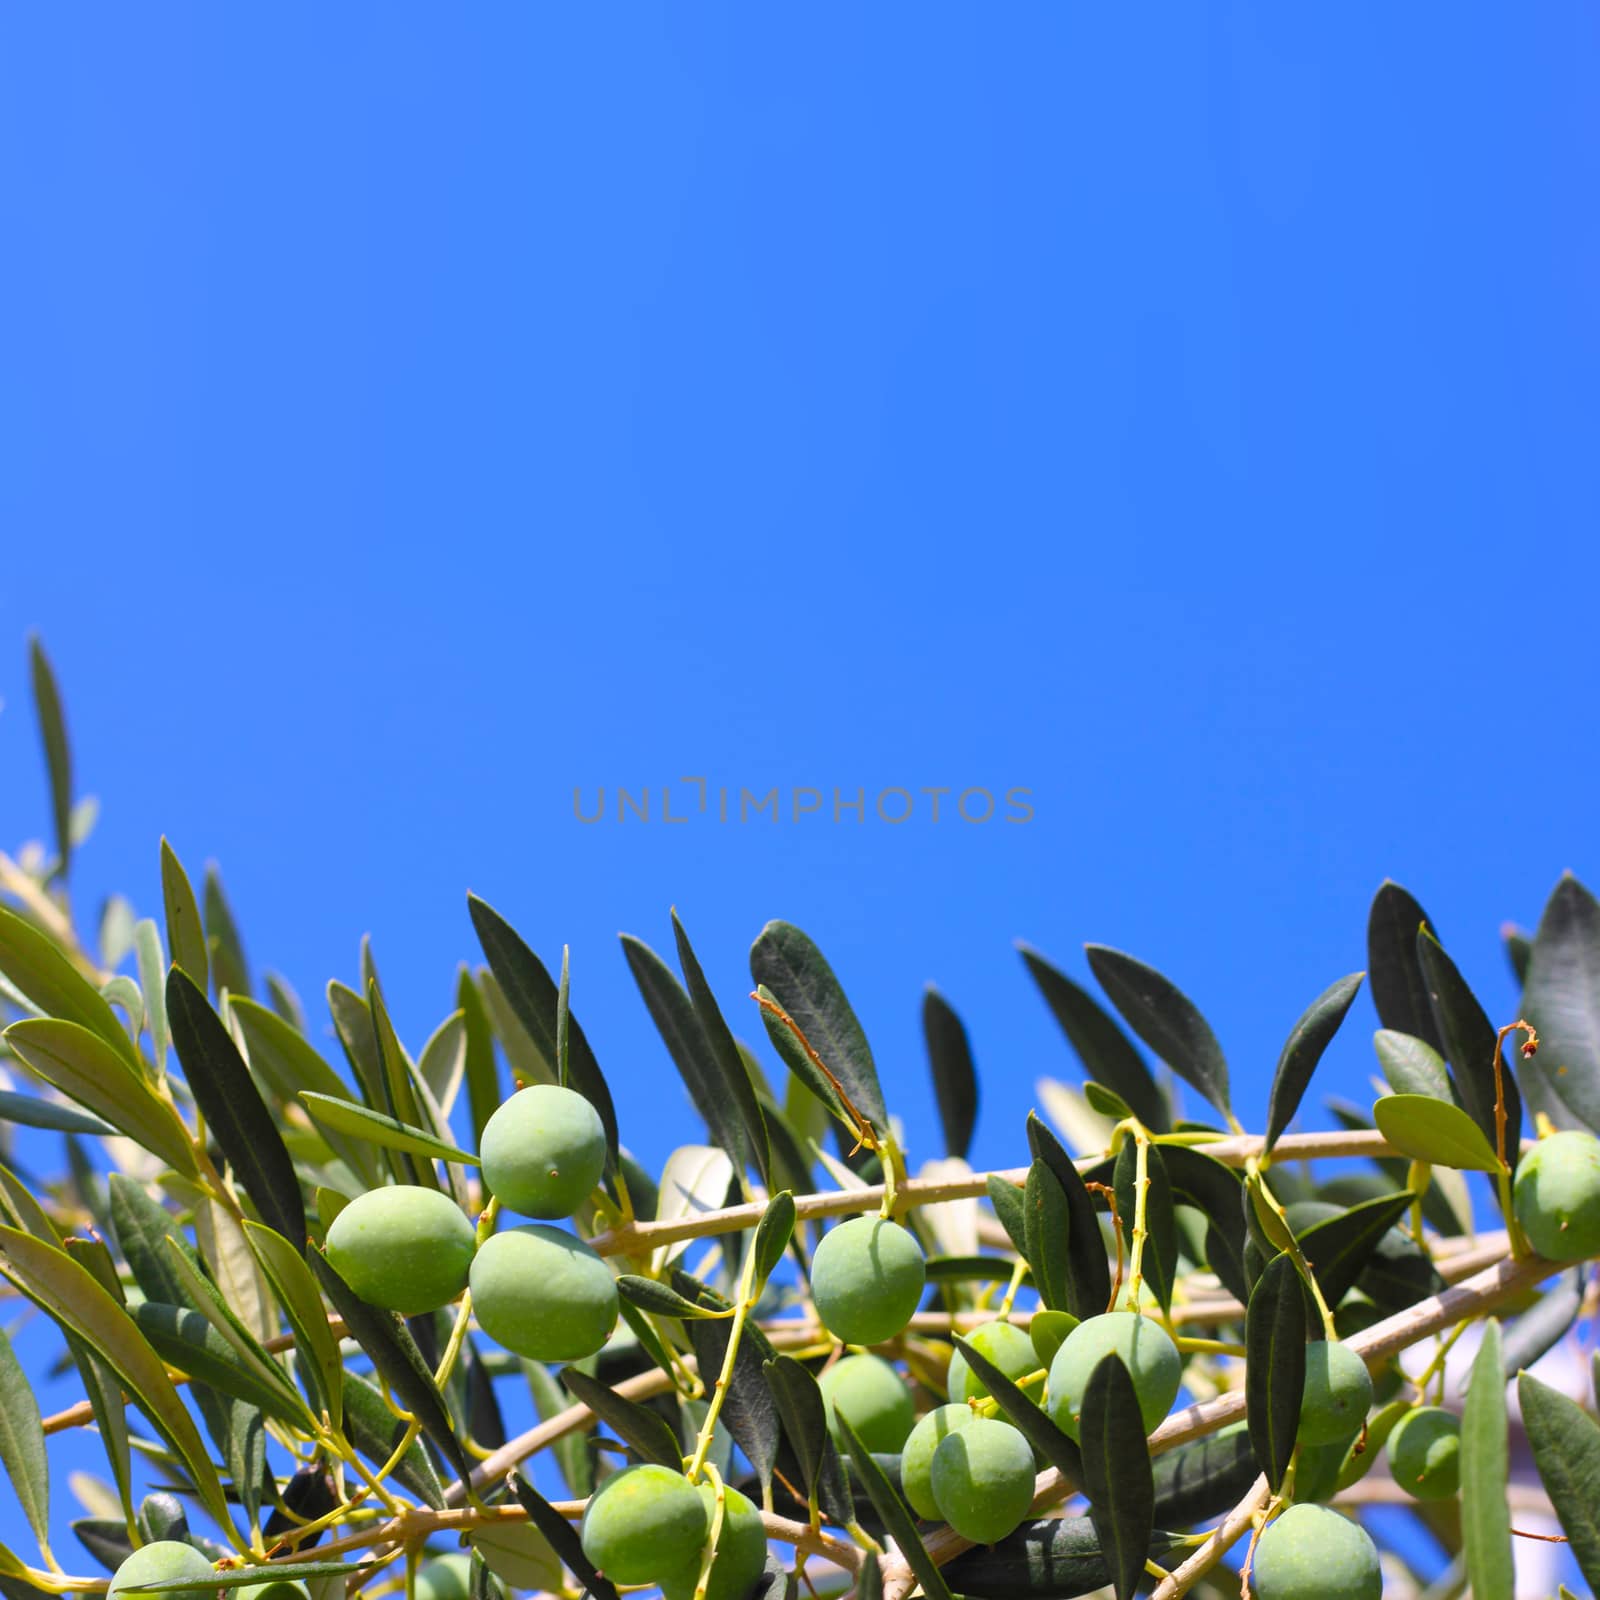 Olives on a branch . Close up of green olives on a tree in garden over blue sky background